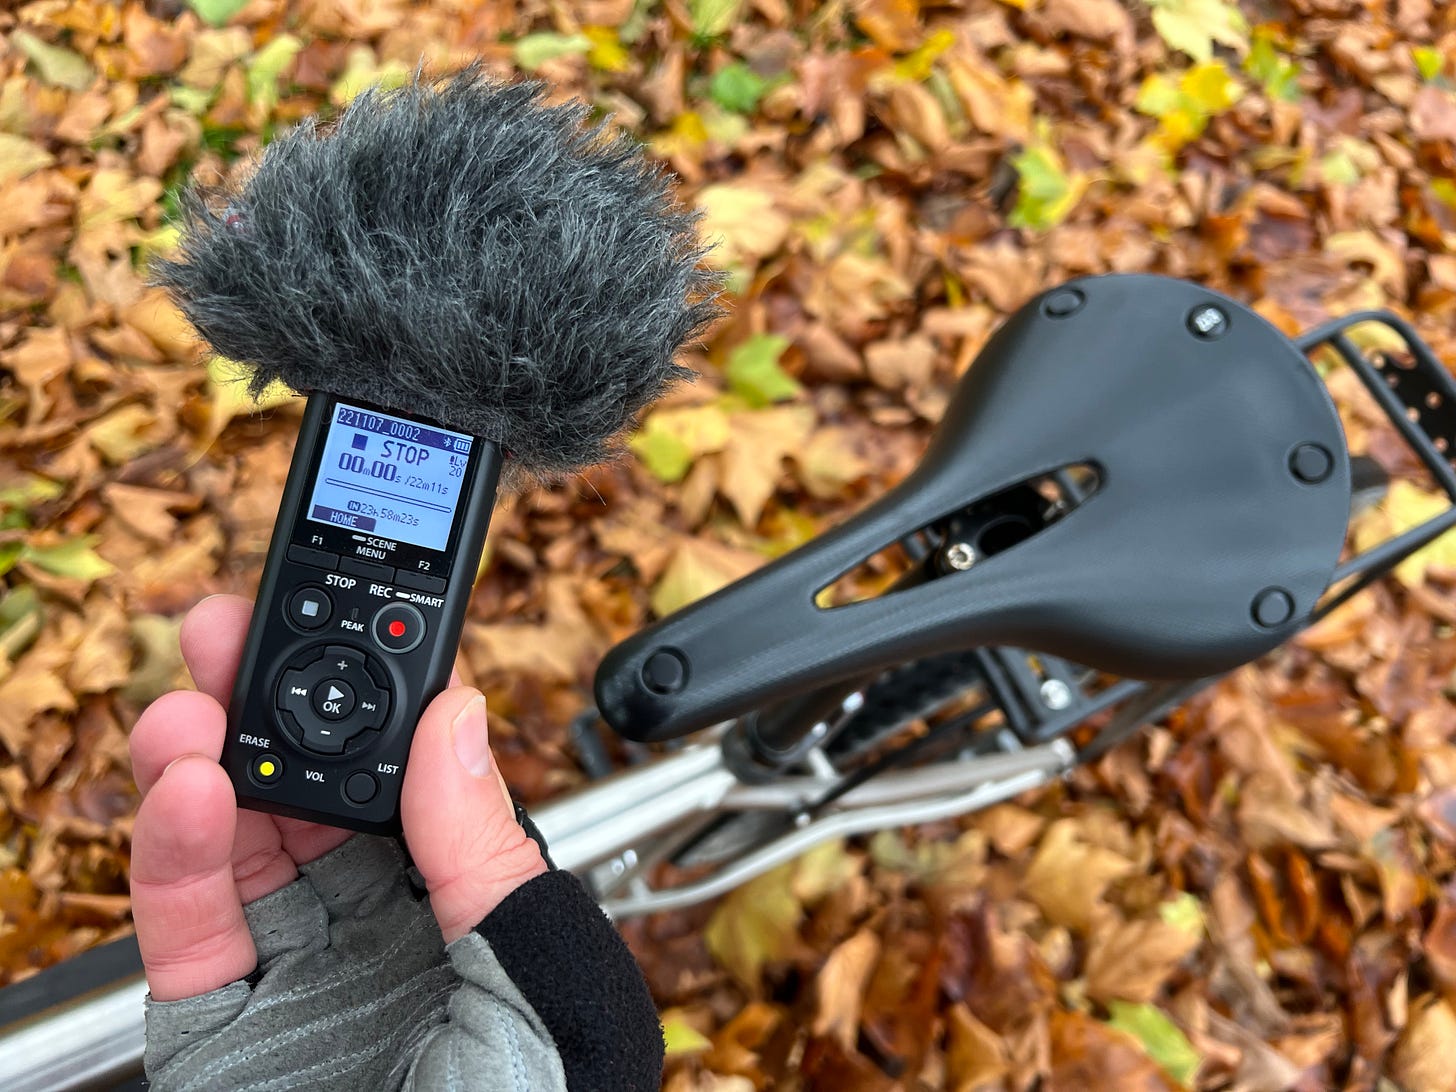 A small audio recorder with big hair is visible being held above a gravel bike standing on a bed of autumn leaves.